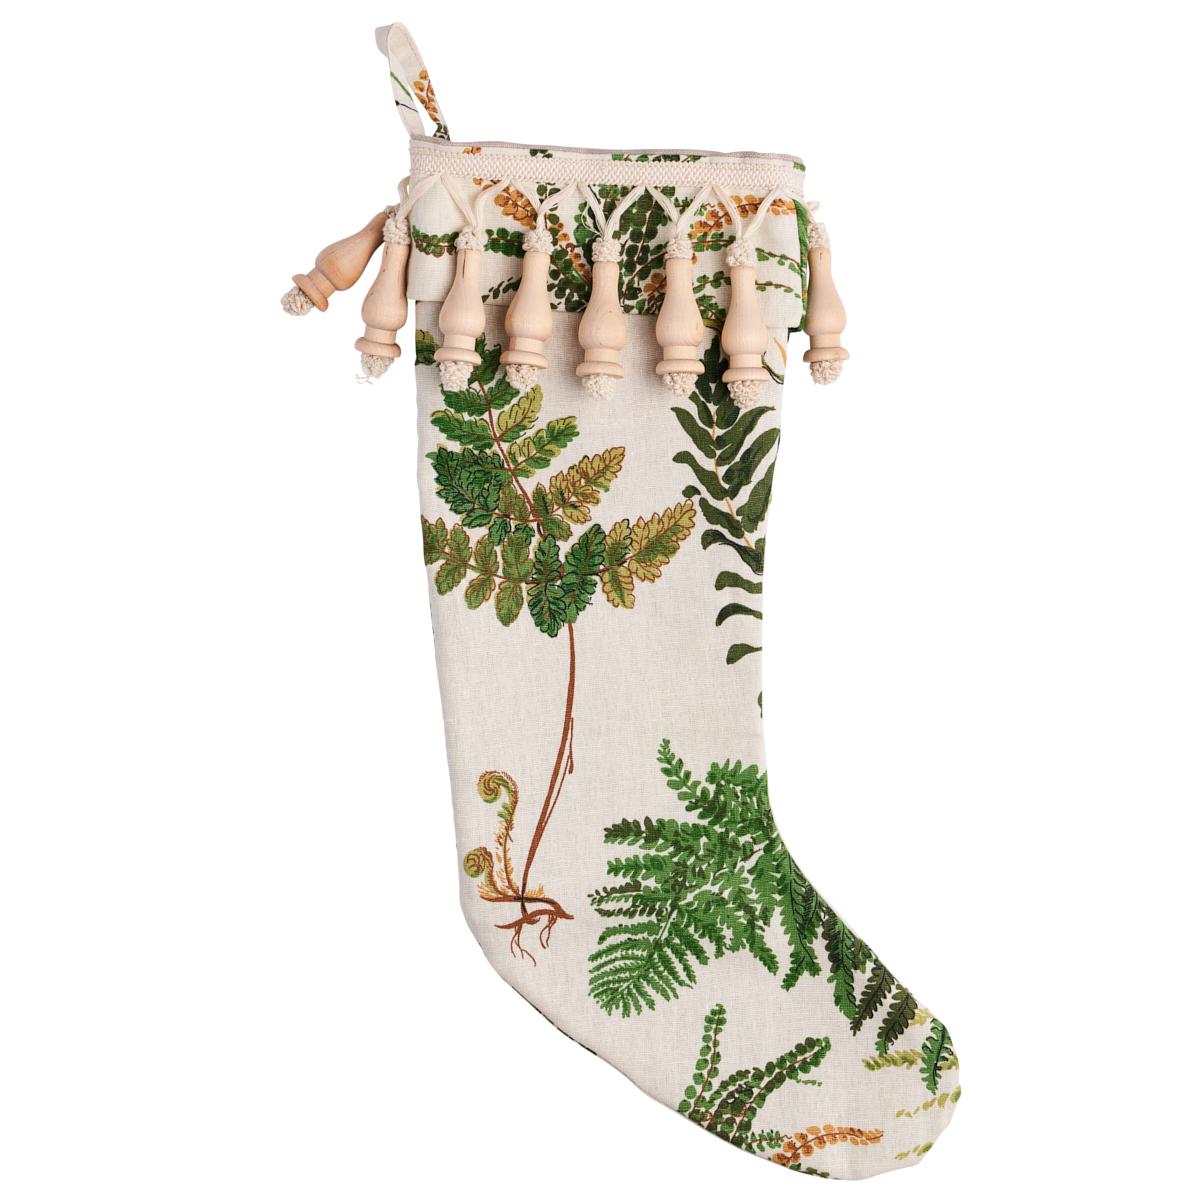 This order includes:
1 Rolling Hills Stocking
1 Les Fougeres Stocking
1 Eugenie Stocking


This not-quite-conventional limited-edition holiday stocking takes green in a different direction with Les Fougeres, a botanical print of leafy ferns based on